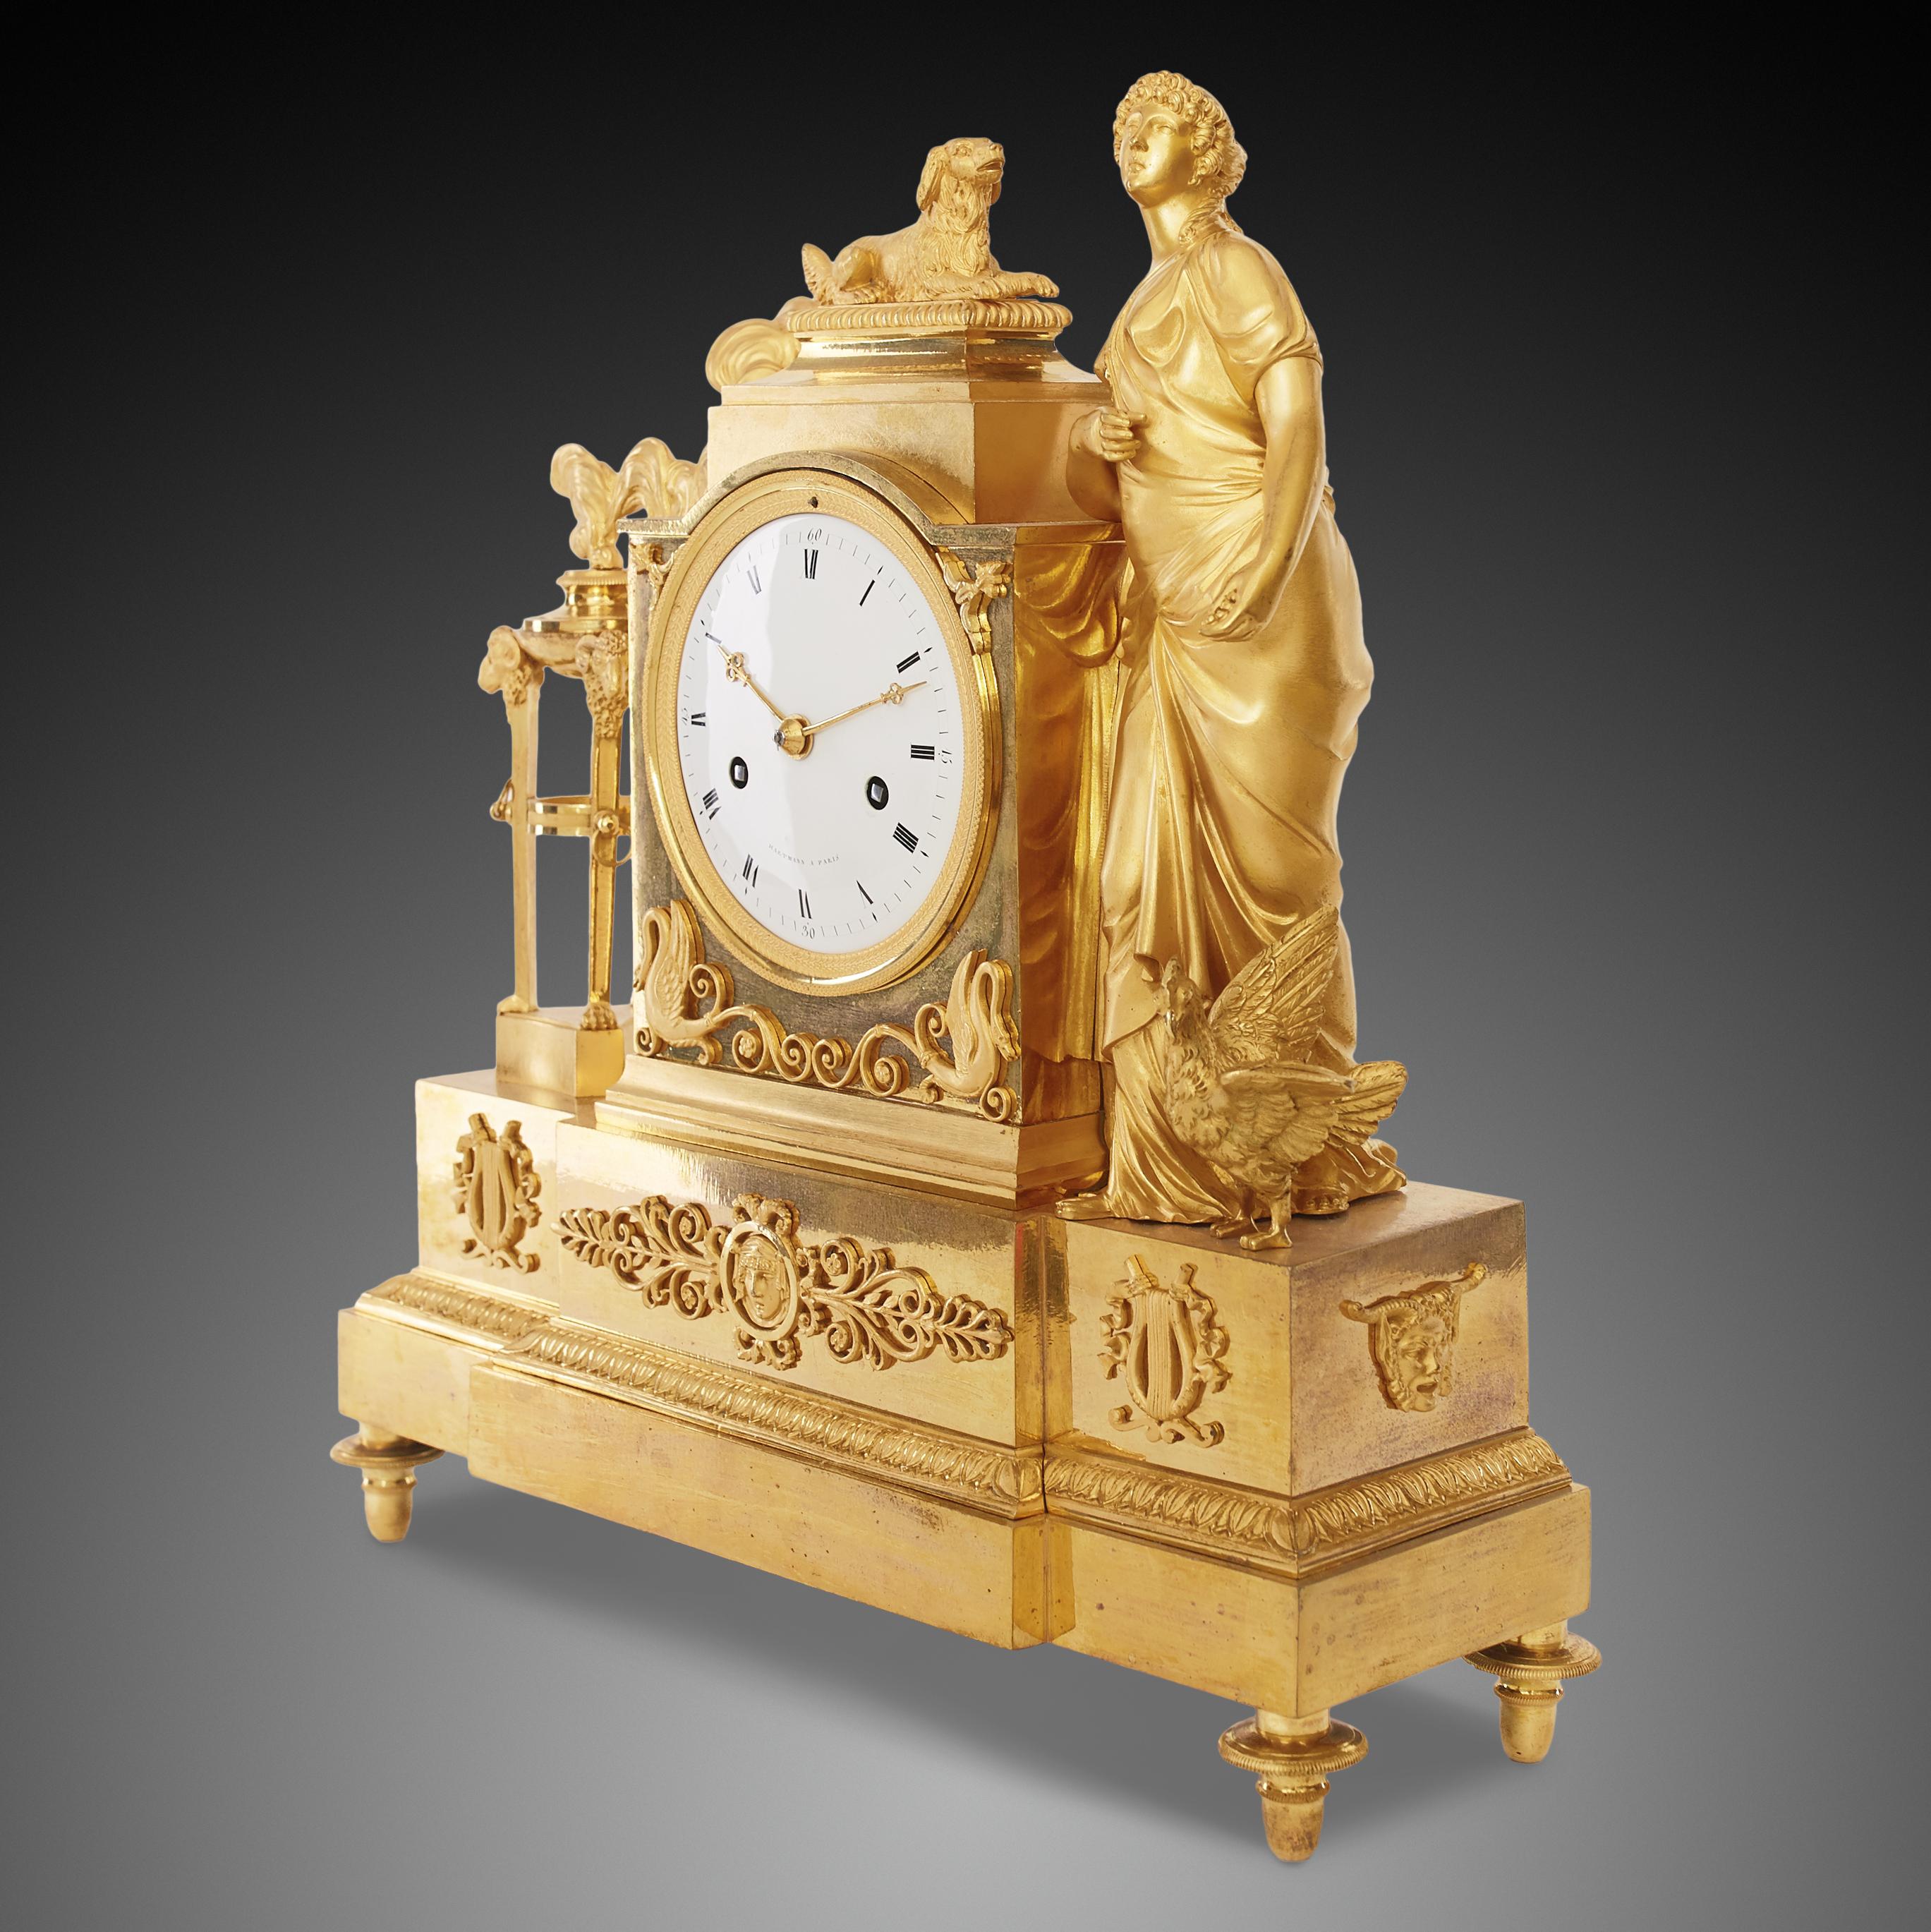 The clock is in excellent and perfect working condition. In addition, it was recently cleaned and serviced by a professional clockmaker who specializes in maintaining museums.
The eight-days going movement has a wire suspension pendulum, It strikes